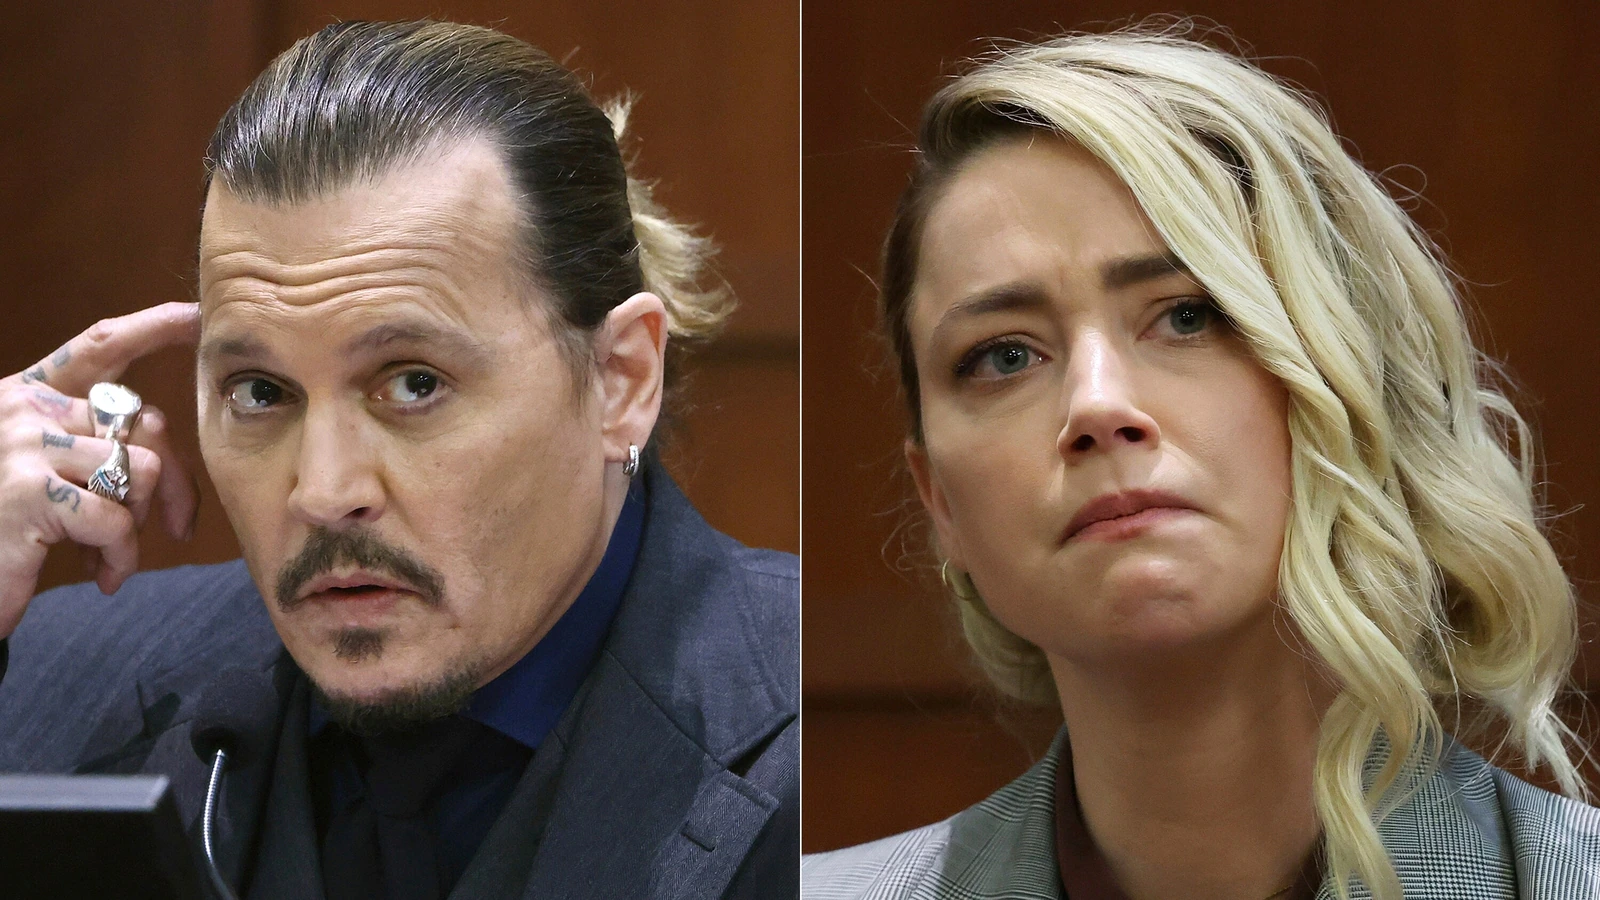 Johnny Depp and Amber Heard during the defamation trial.